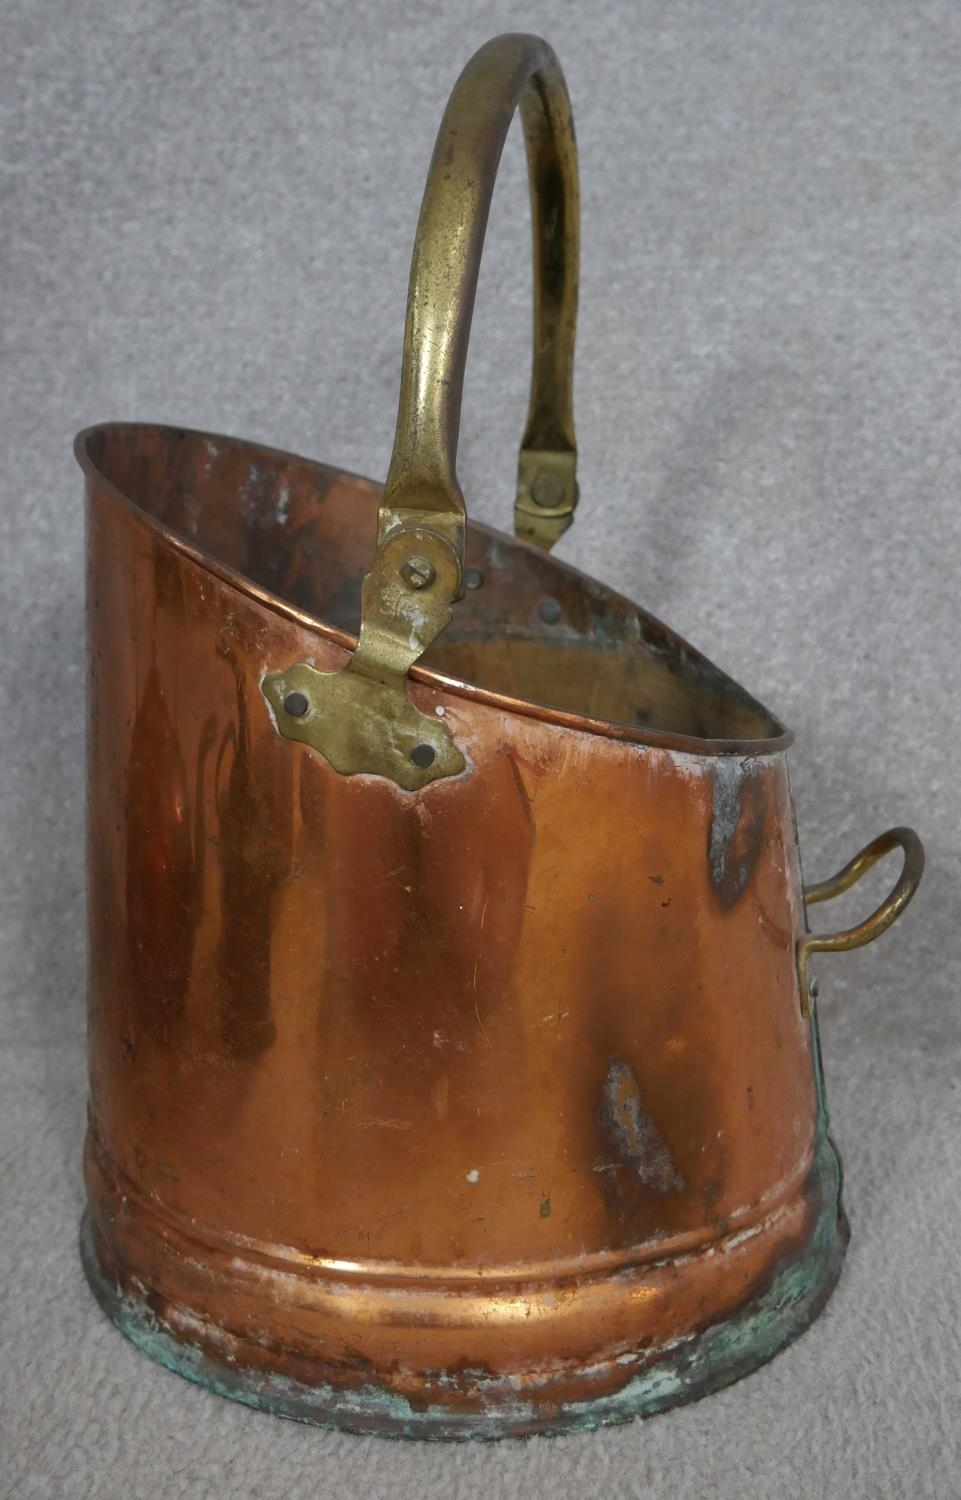 A brass and copper coal scuttle, a copper pan and teapot, a vintage coffee grinder and a 2lb weight. - Image 8 of 8